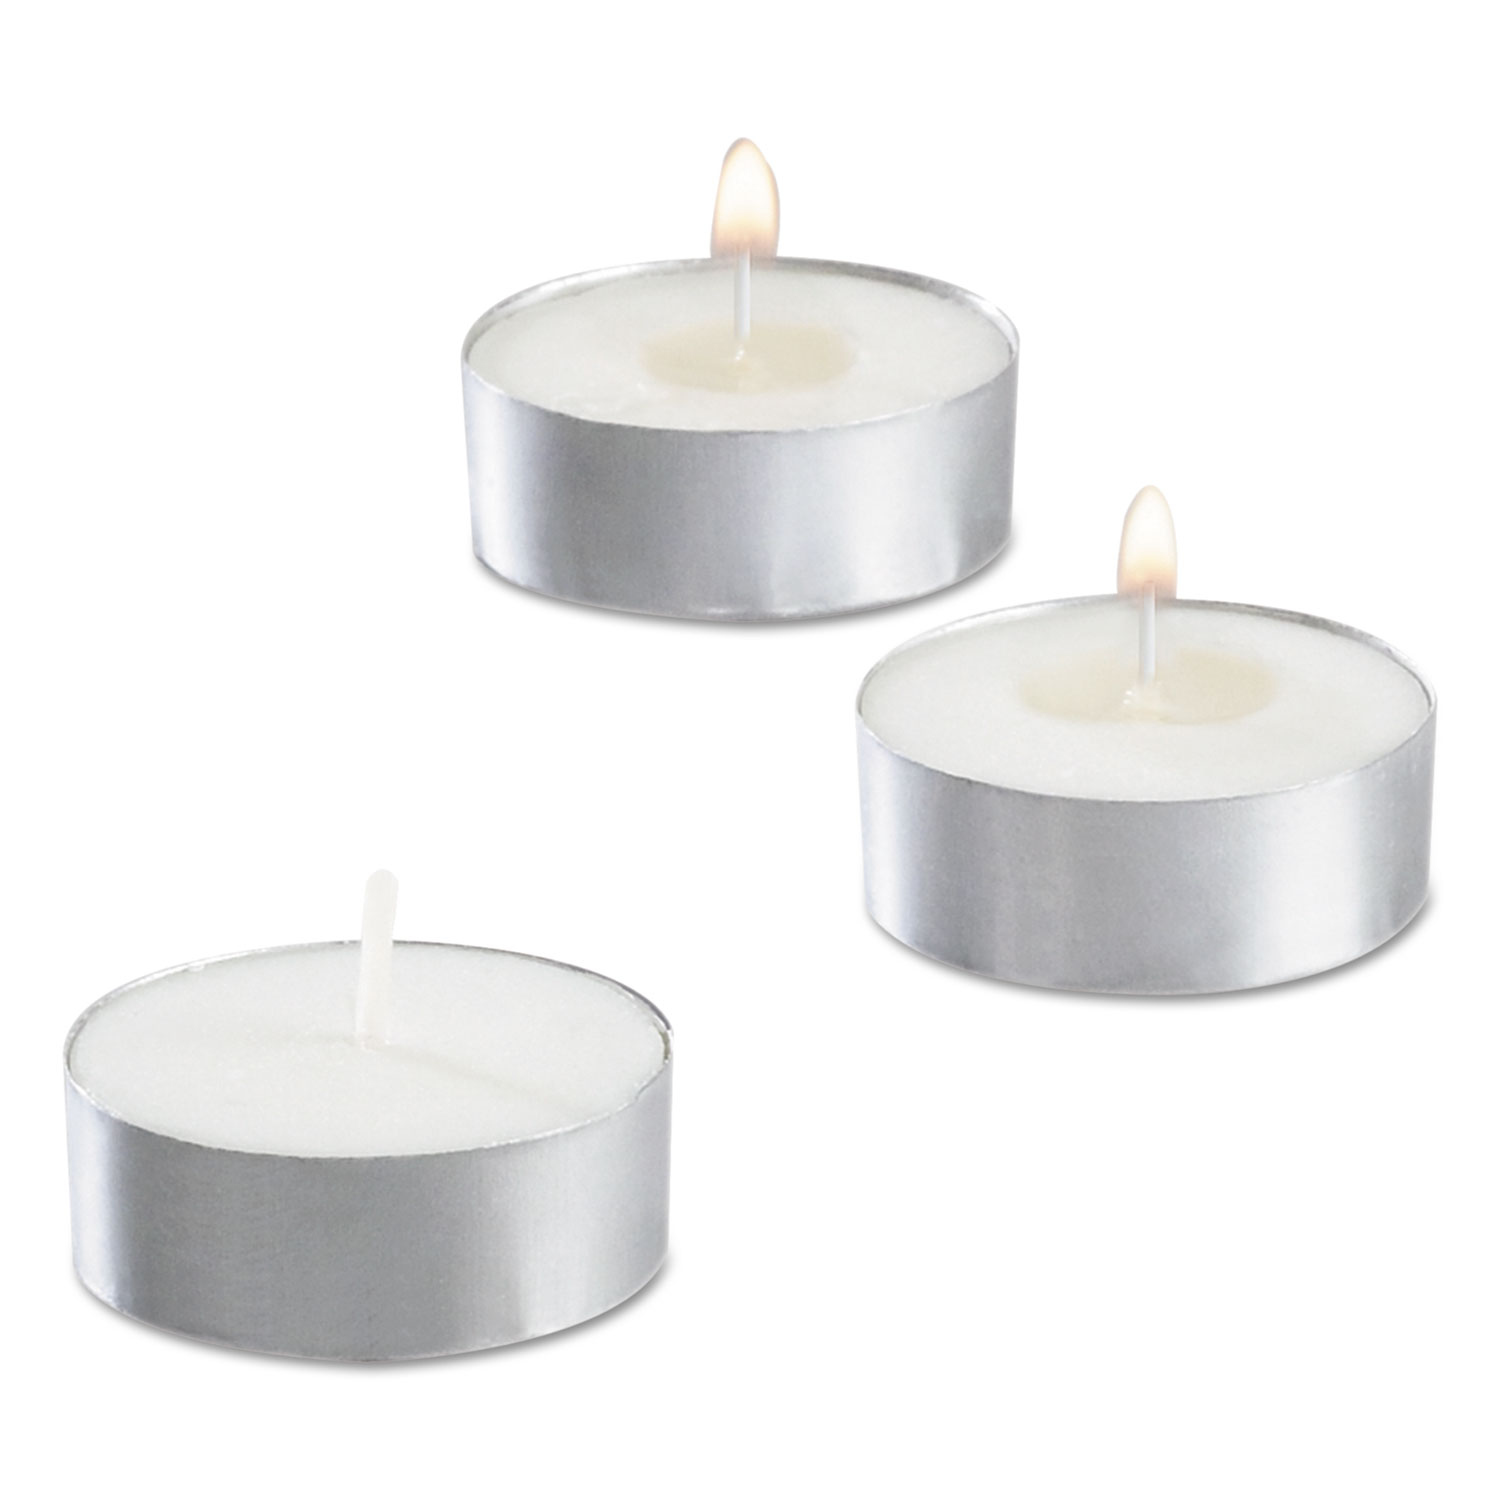  Sterno STE 40100 Tealight Candle, 5 Hour Burn, 0.5h, White, 50/Pack, 10 Packs/Carton (STE40100) 